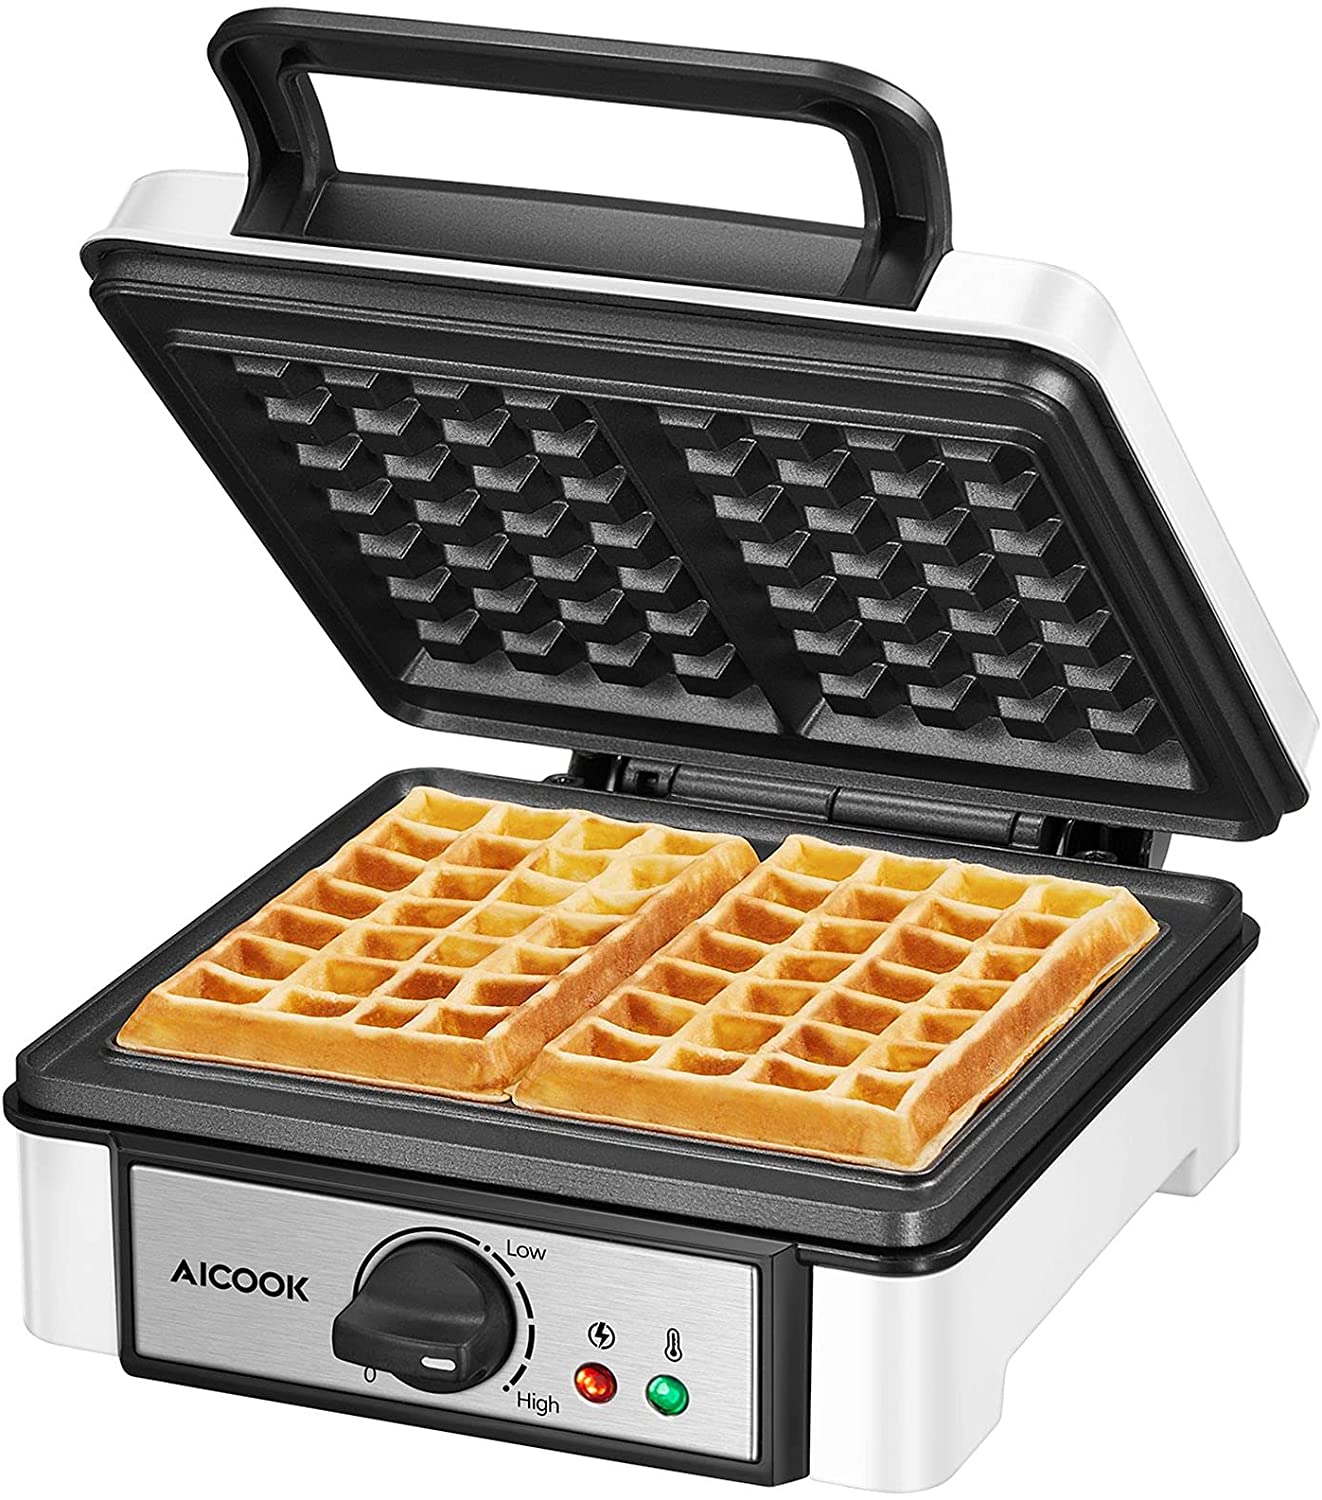 AICOOK | Waffle Maker Iron, 1200W Belgian Waffle Machine, Non-Stick Design, Browning Control, Easy to Store Compact Design, Medium, White